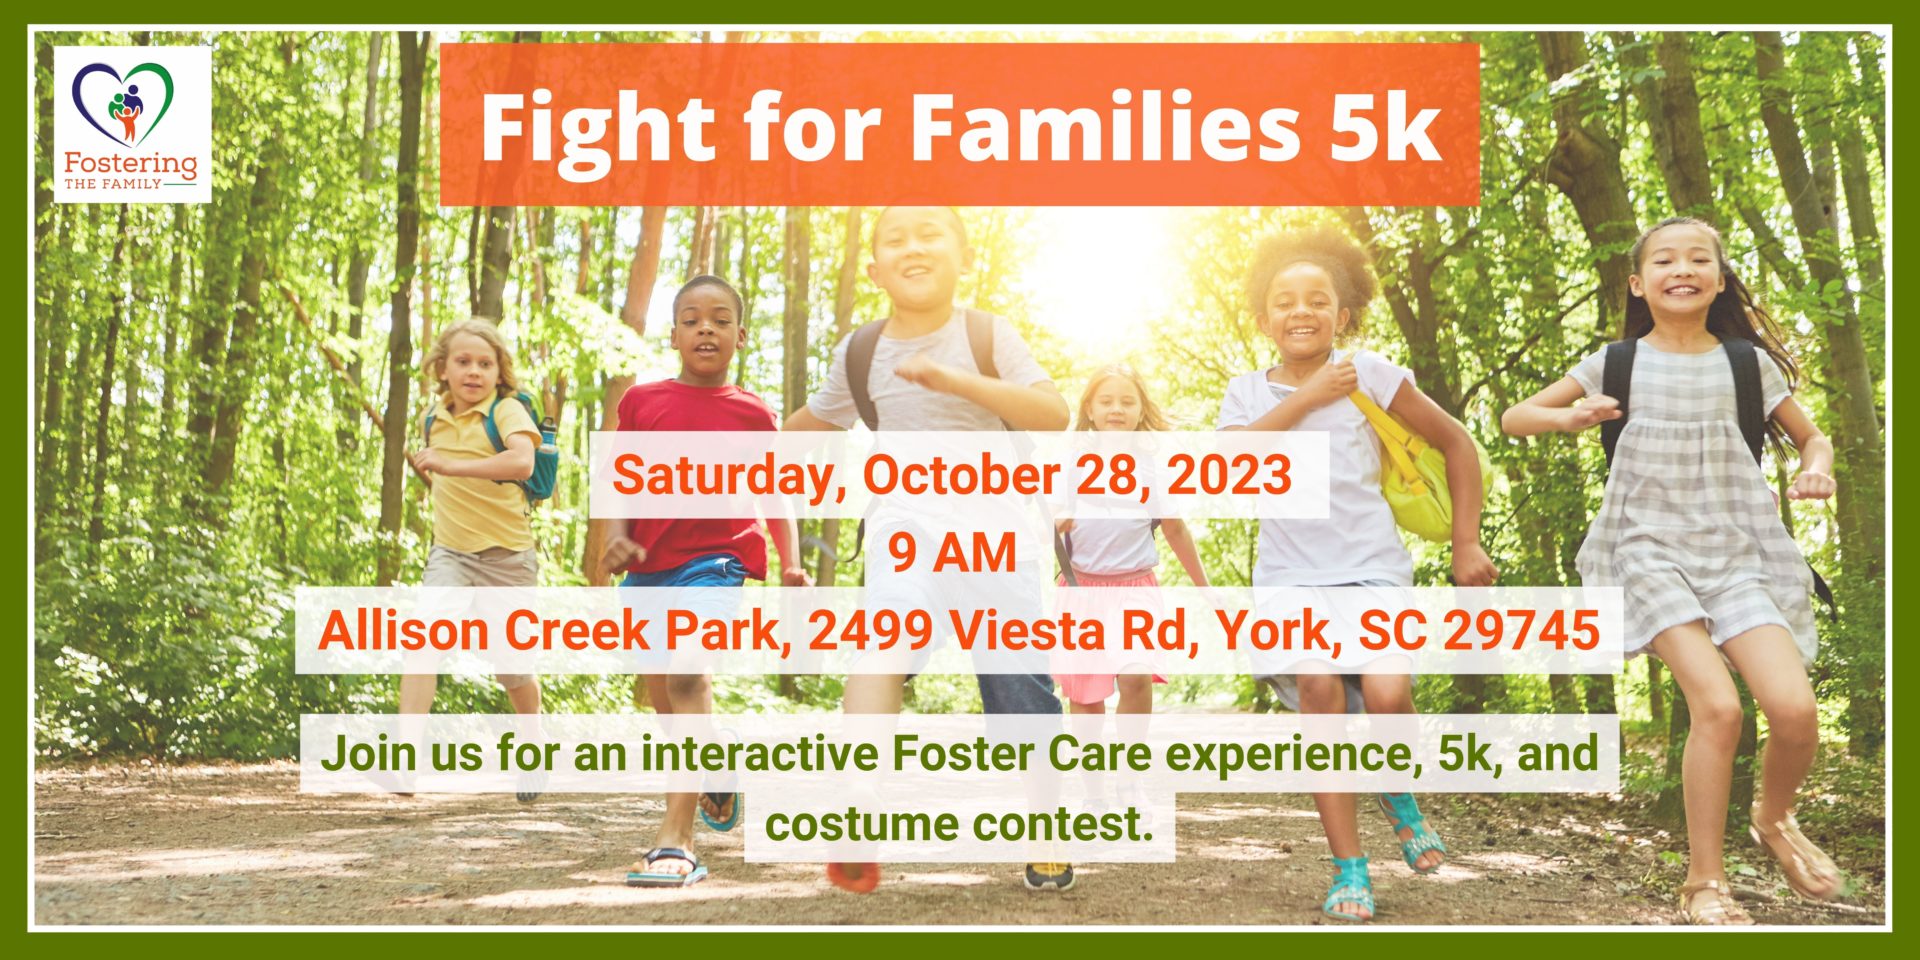 2023 Fight for Families 5k Banner